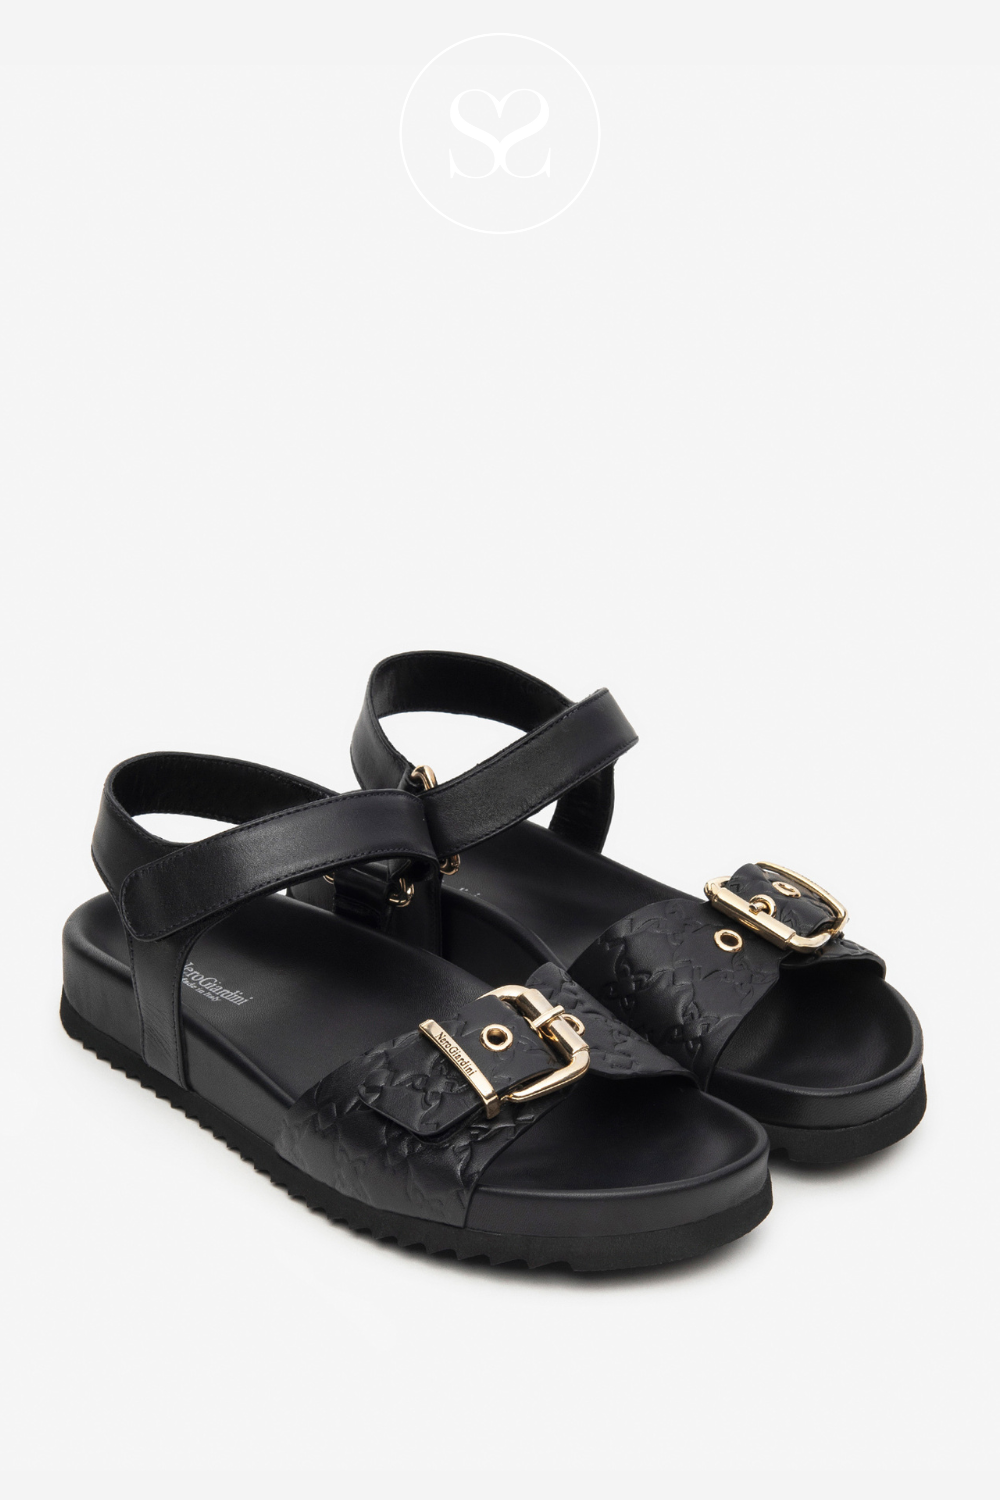 Nero Giardini e410501d black sandals with arch support and buckle